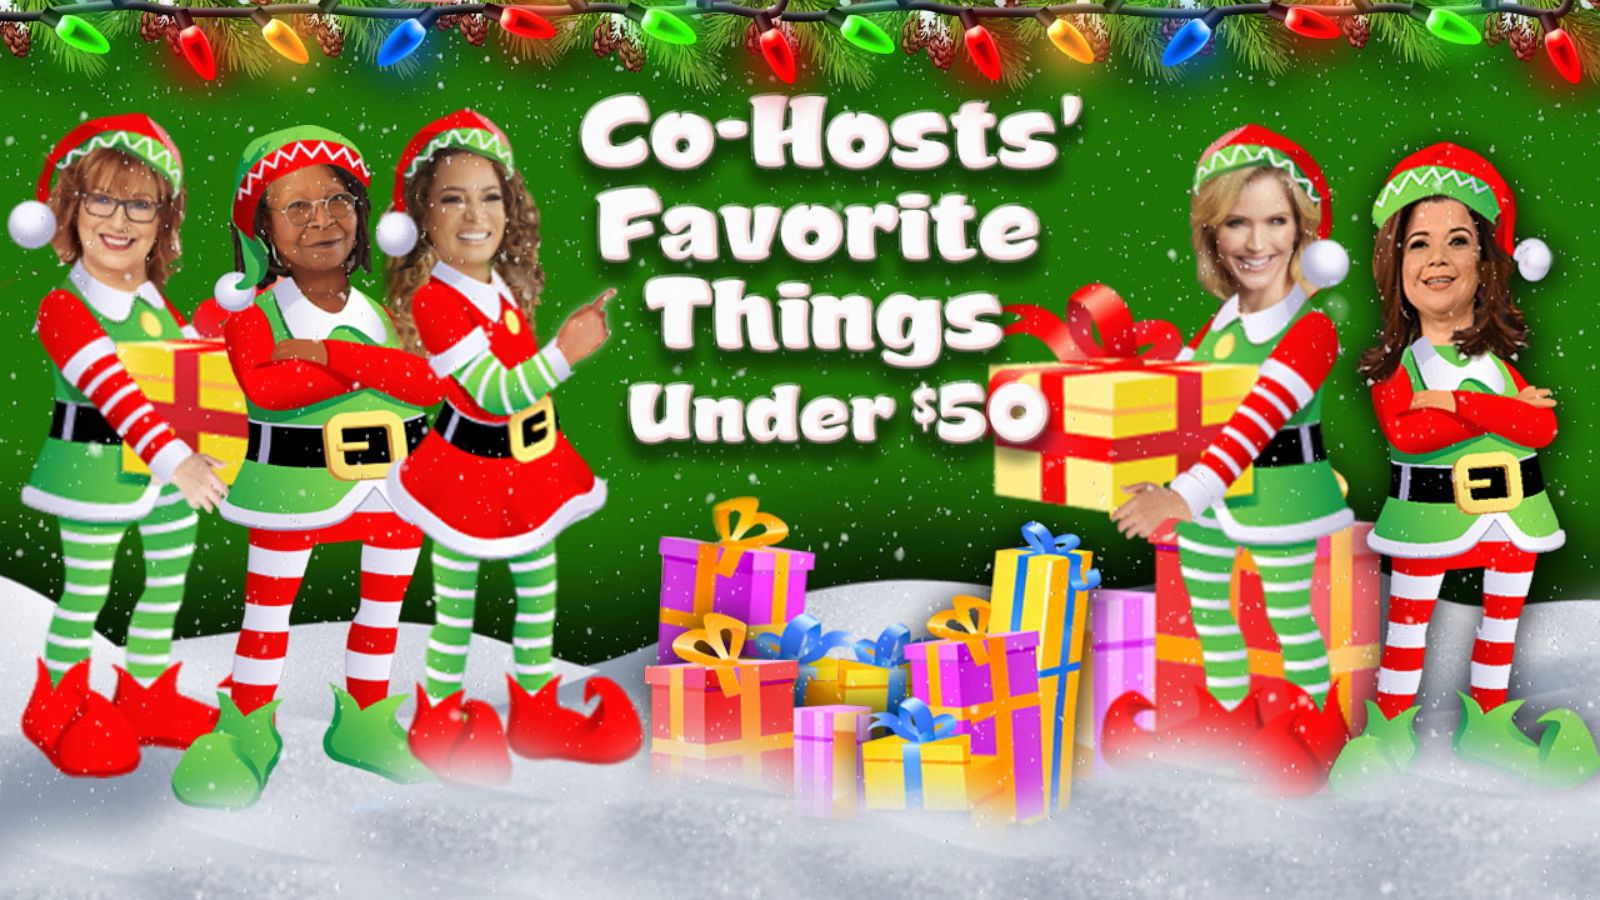 The View' co-hosts share their favorite gifts under $50 for the